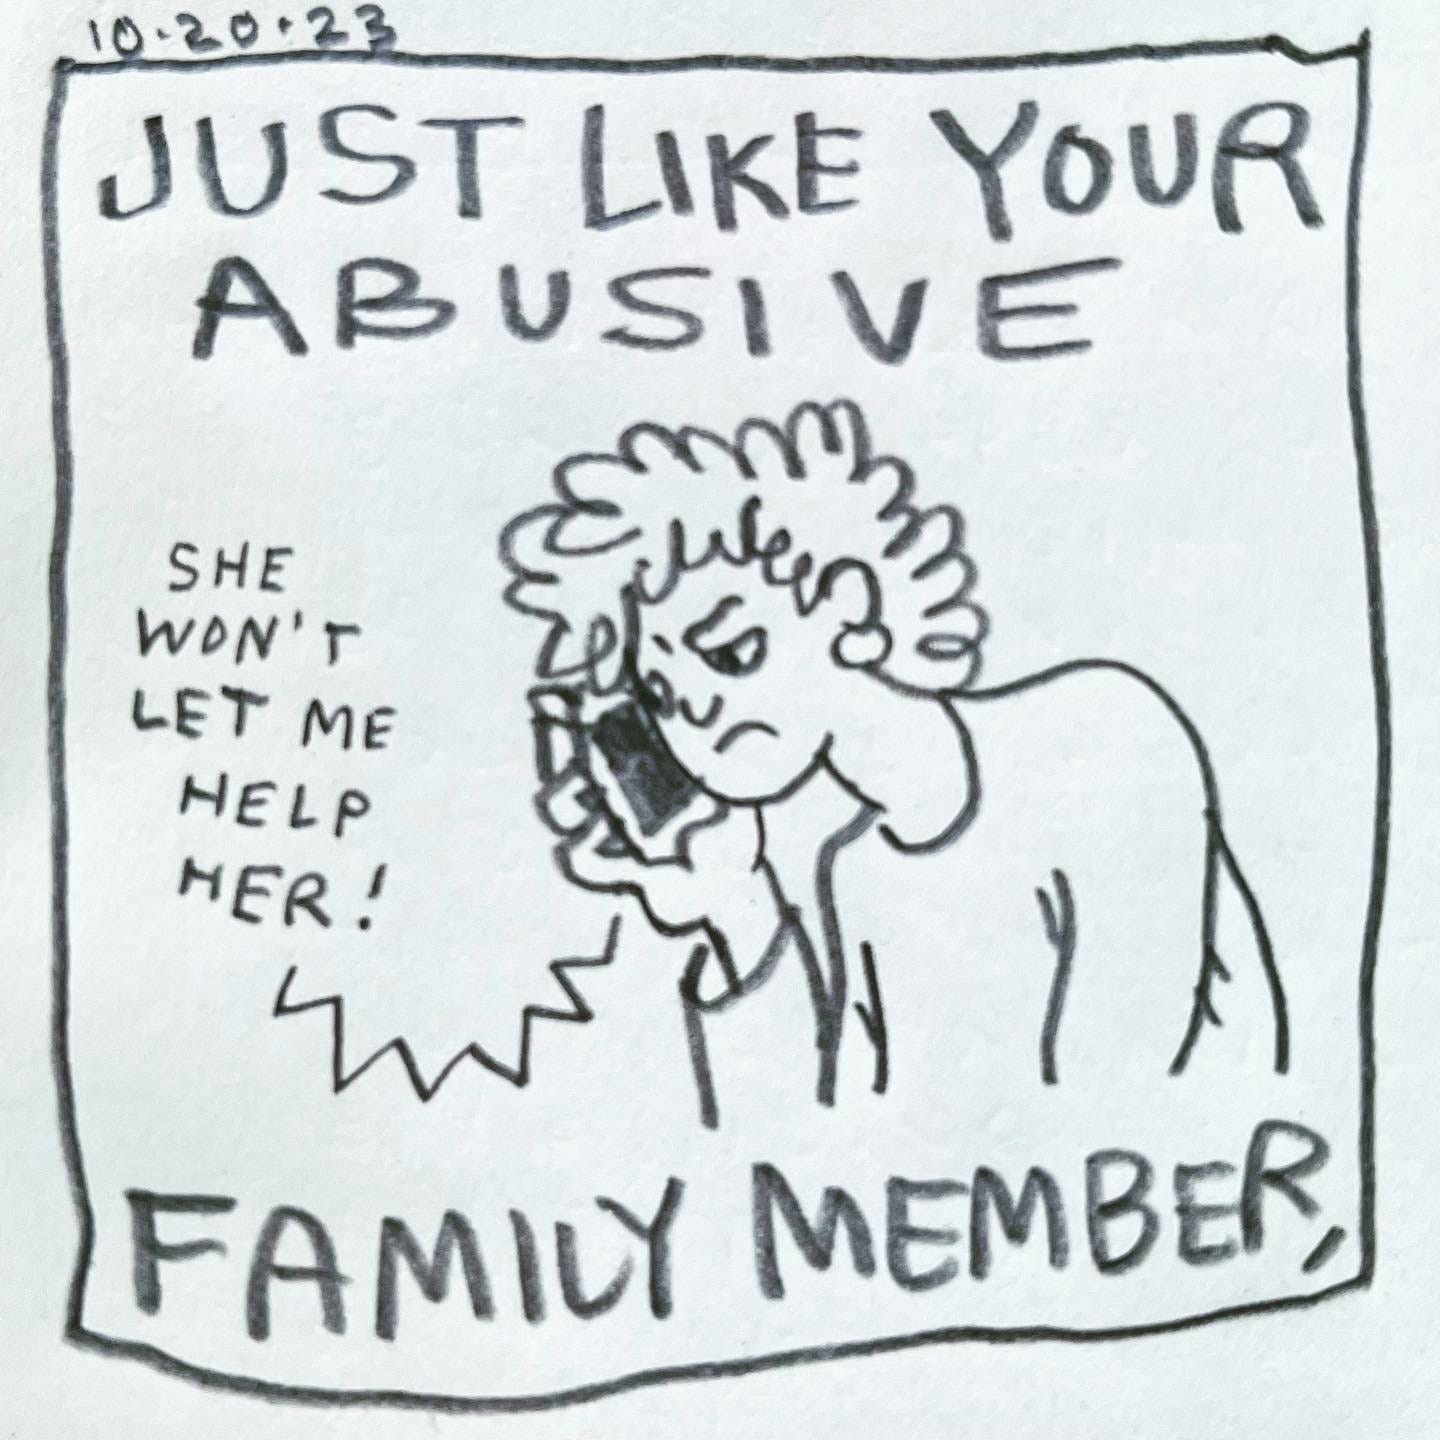 Panel 1: just like your abusive family member, Image: Lark holds the phone to their face, frowning. eyes downcast and brow furrowed. A voice on the phone says, “she won't let me help her!"